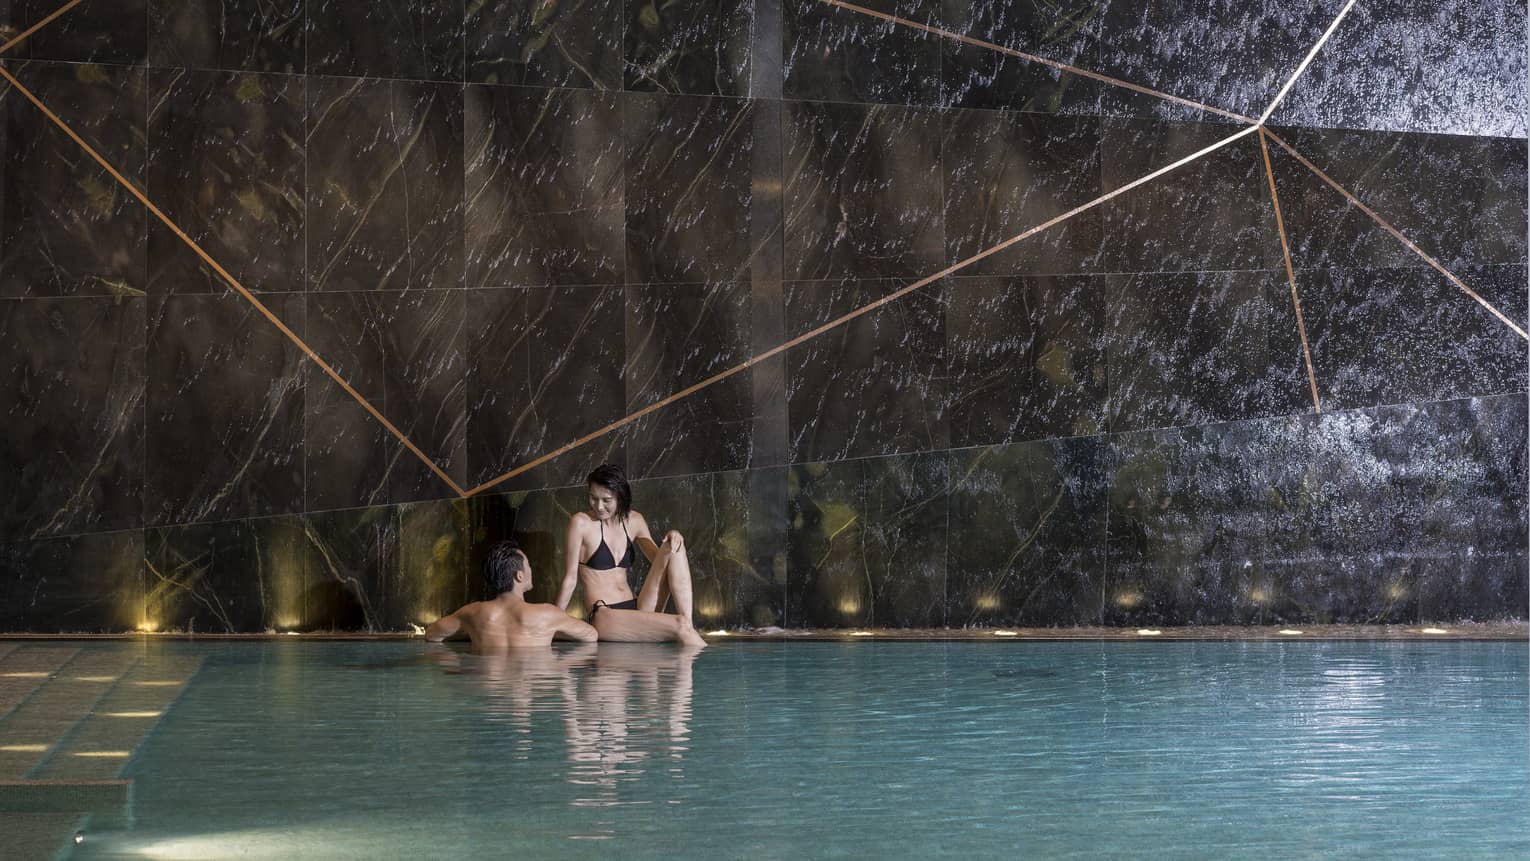 Woman sits on edge of indoor swimming pool, man wades beside her 